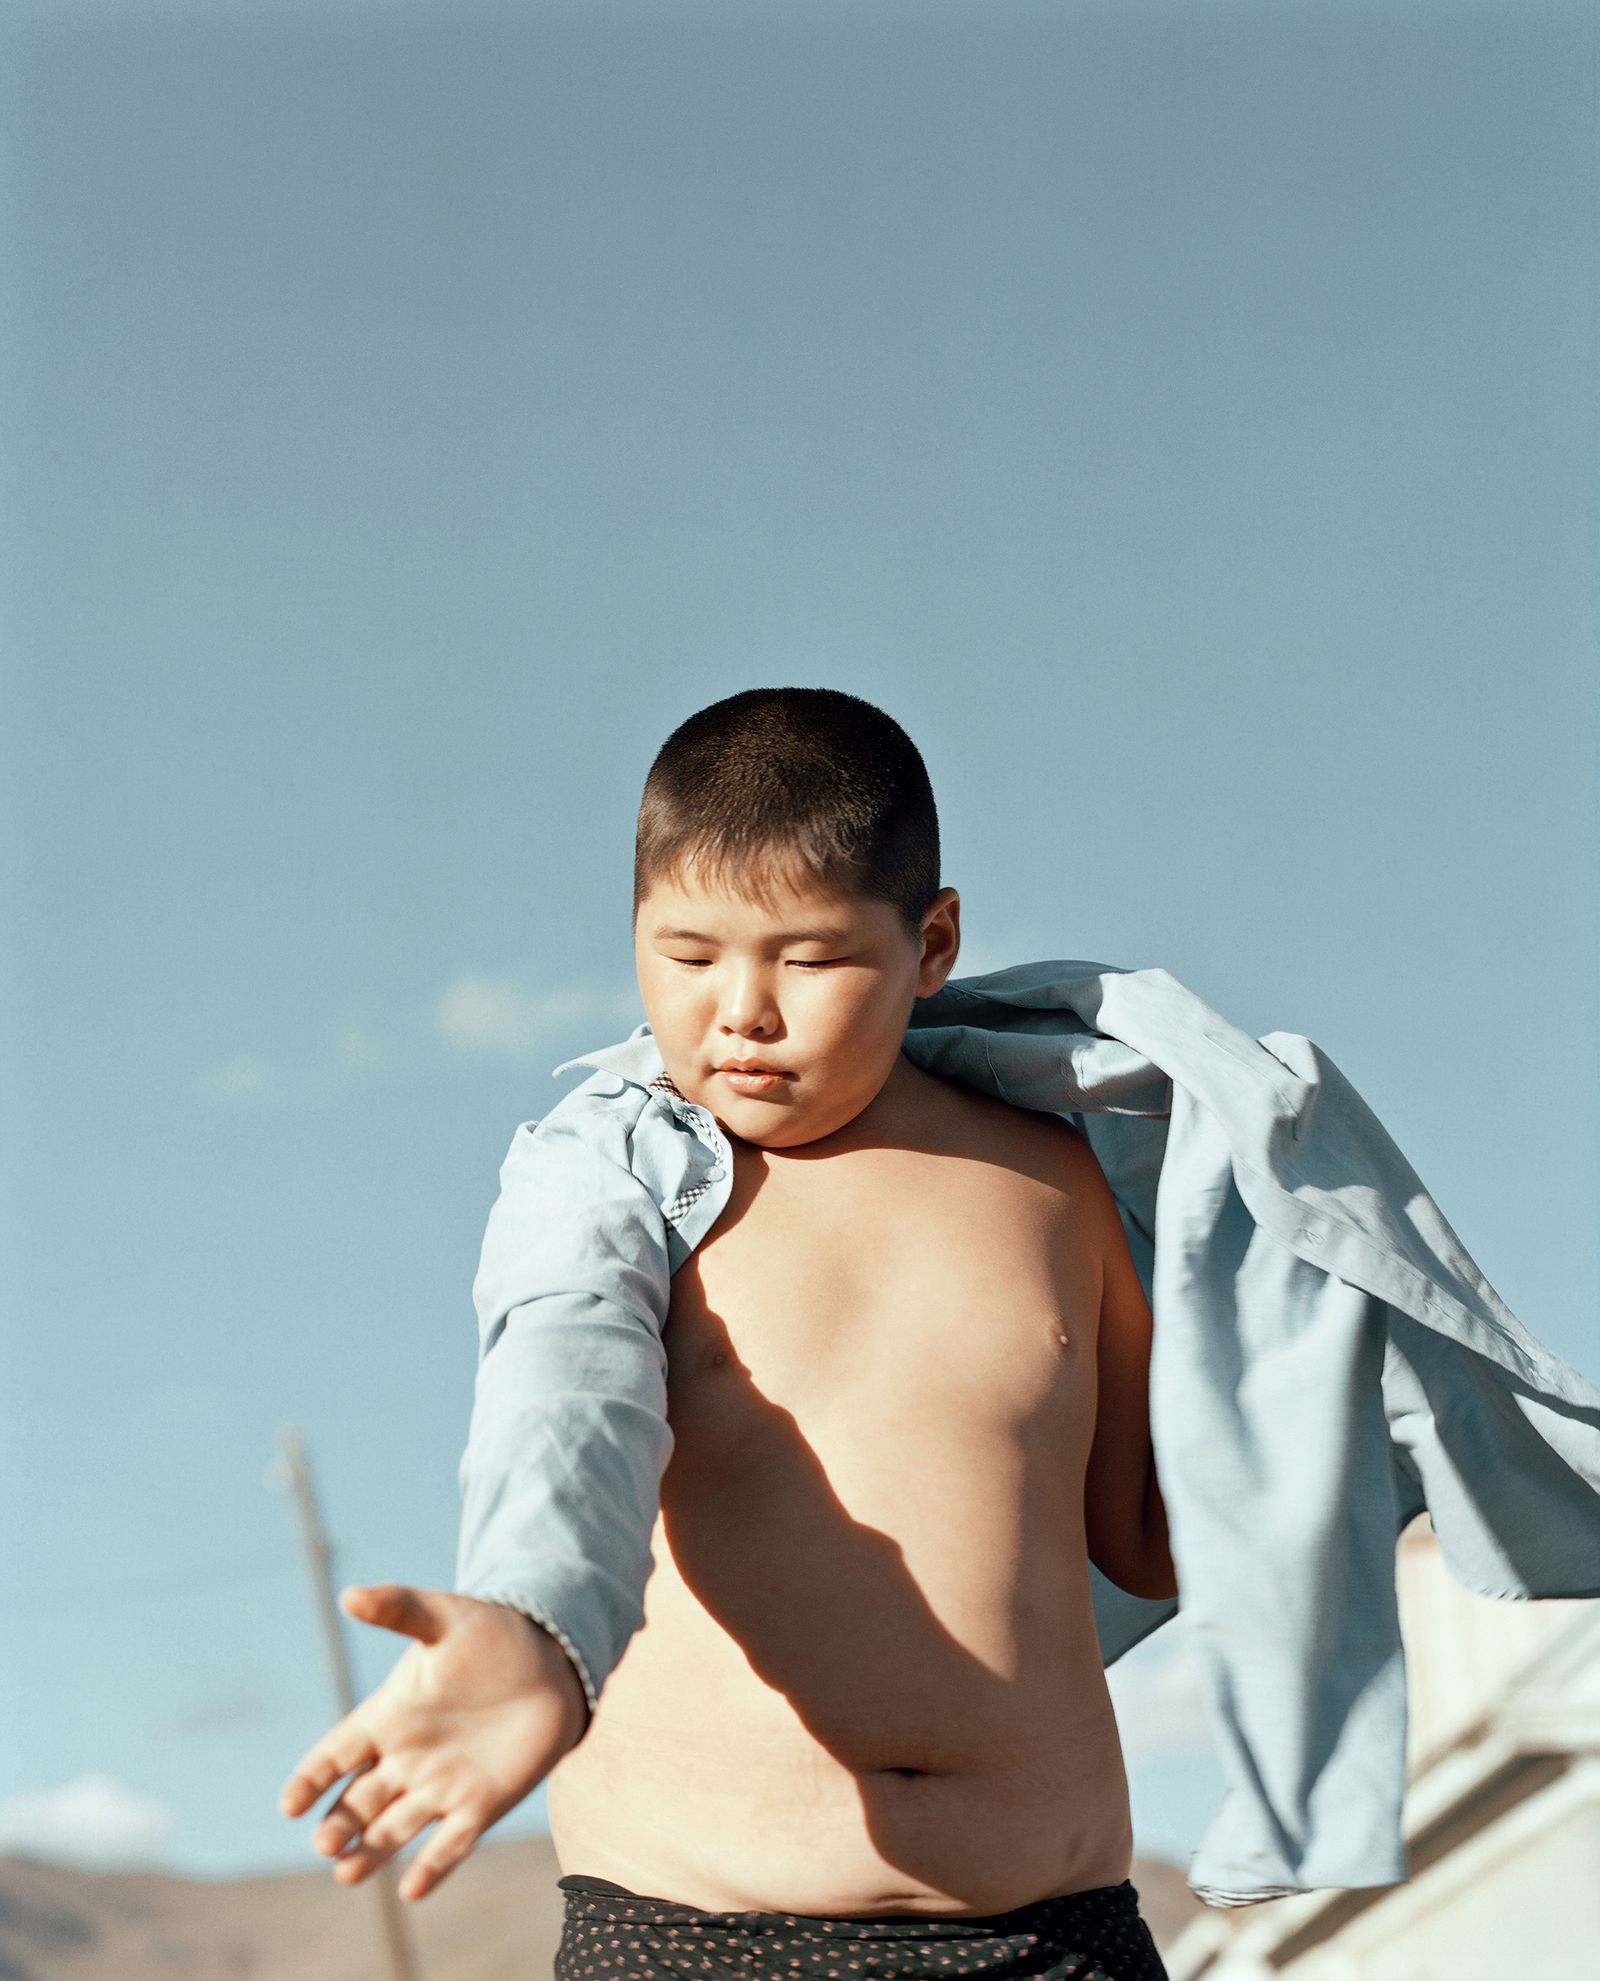 © Catherine Hyland - Image from the Rise of the Mongolians photography project